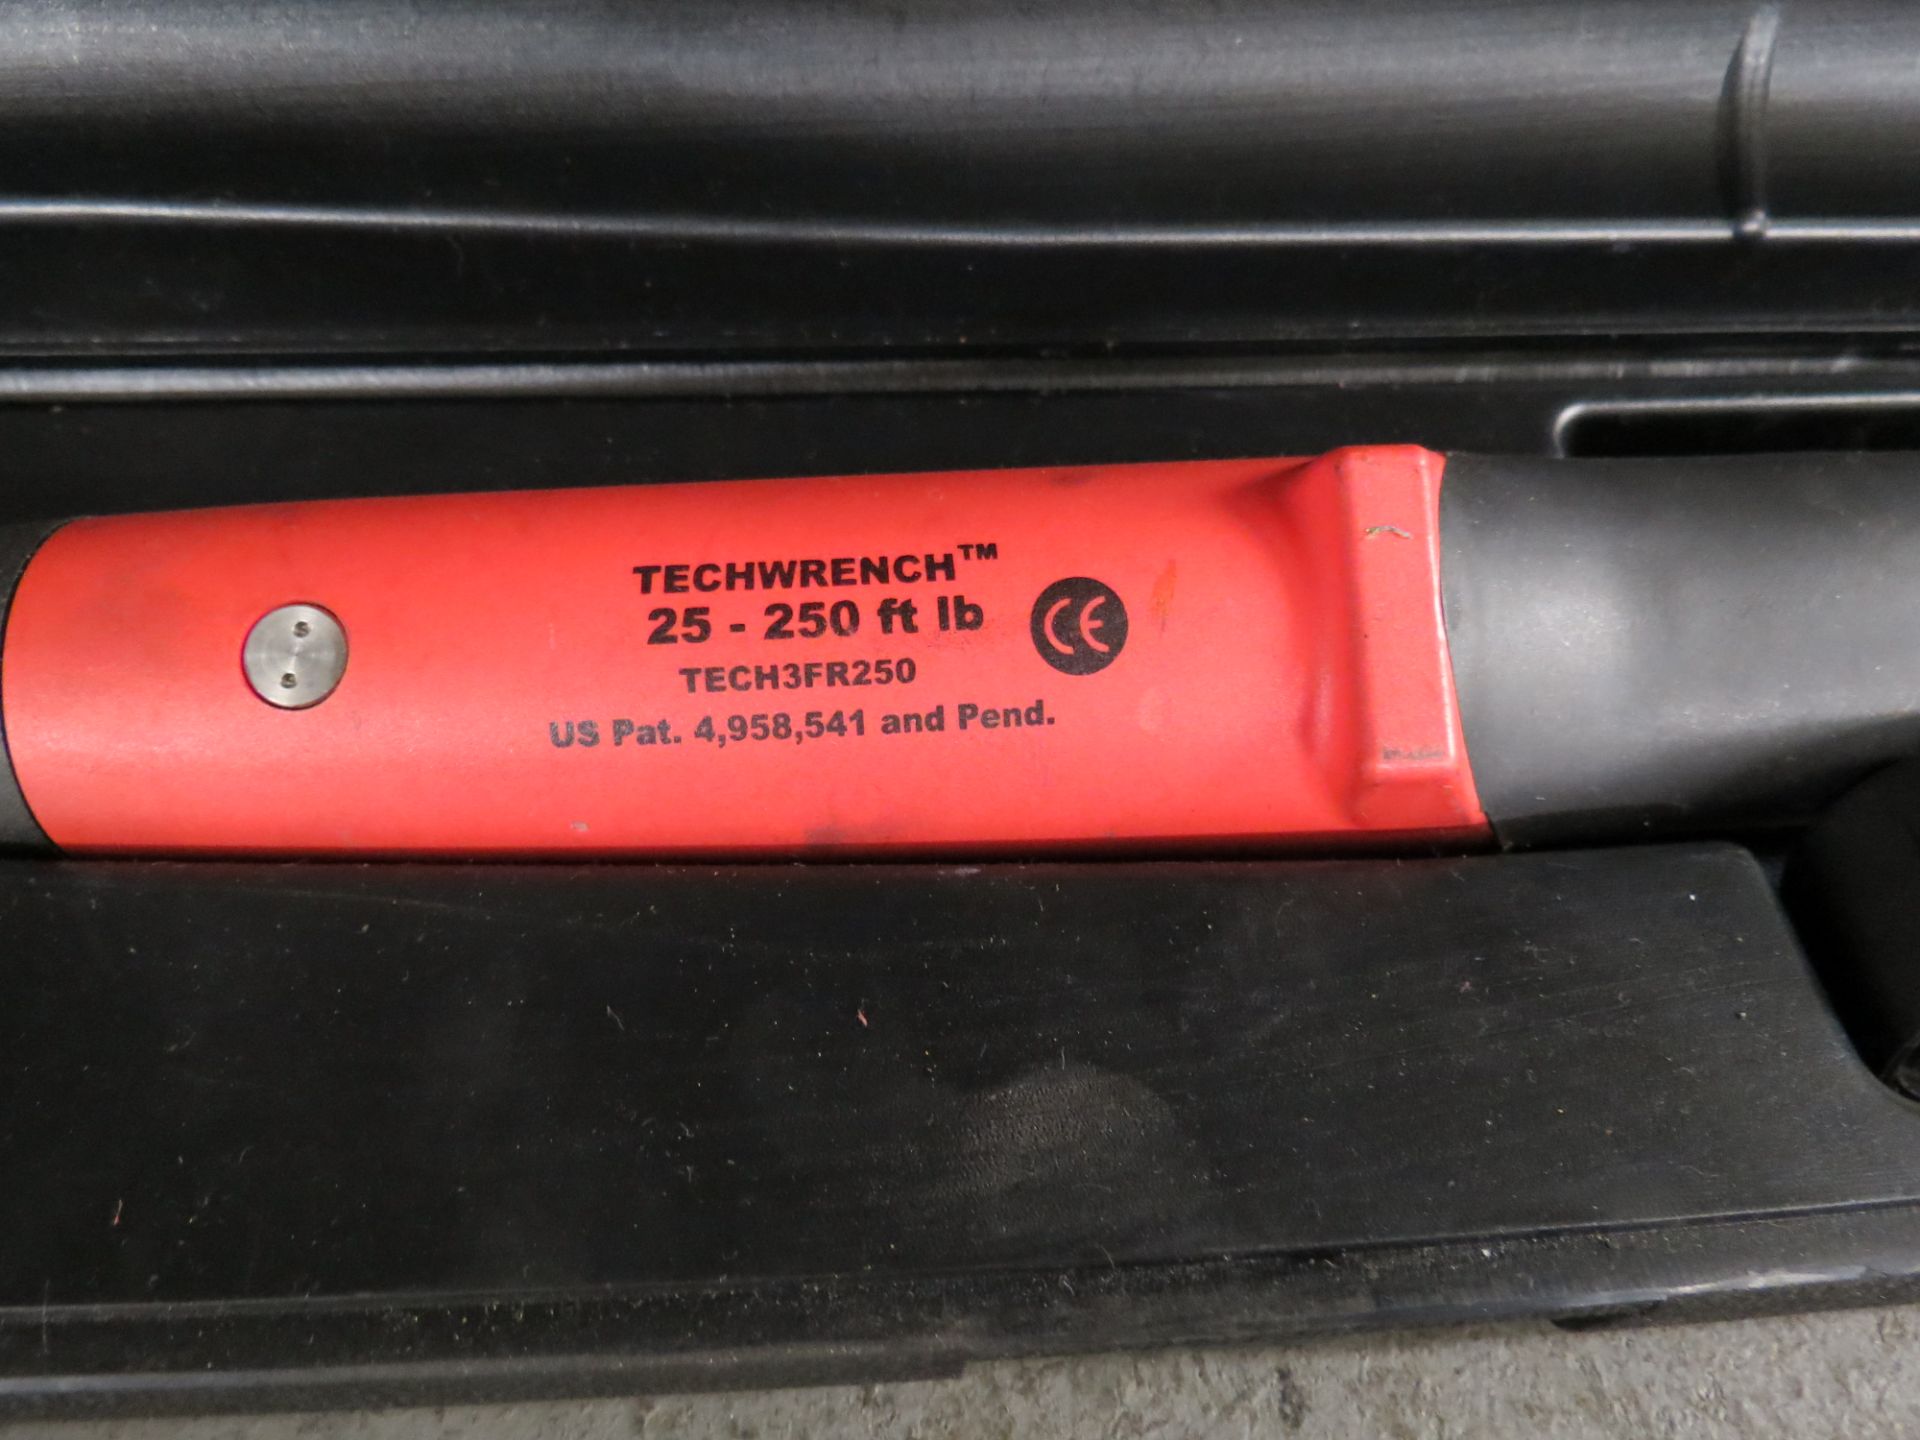 SNAP ON TECHANGLE ELECTRONIC TORQUE DIGITAL WRENCH MDL: ATECH3FR250 (RED HANDLE) - Image 3 of 4